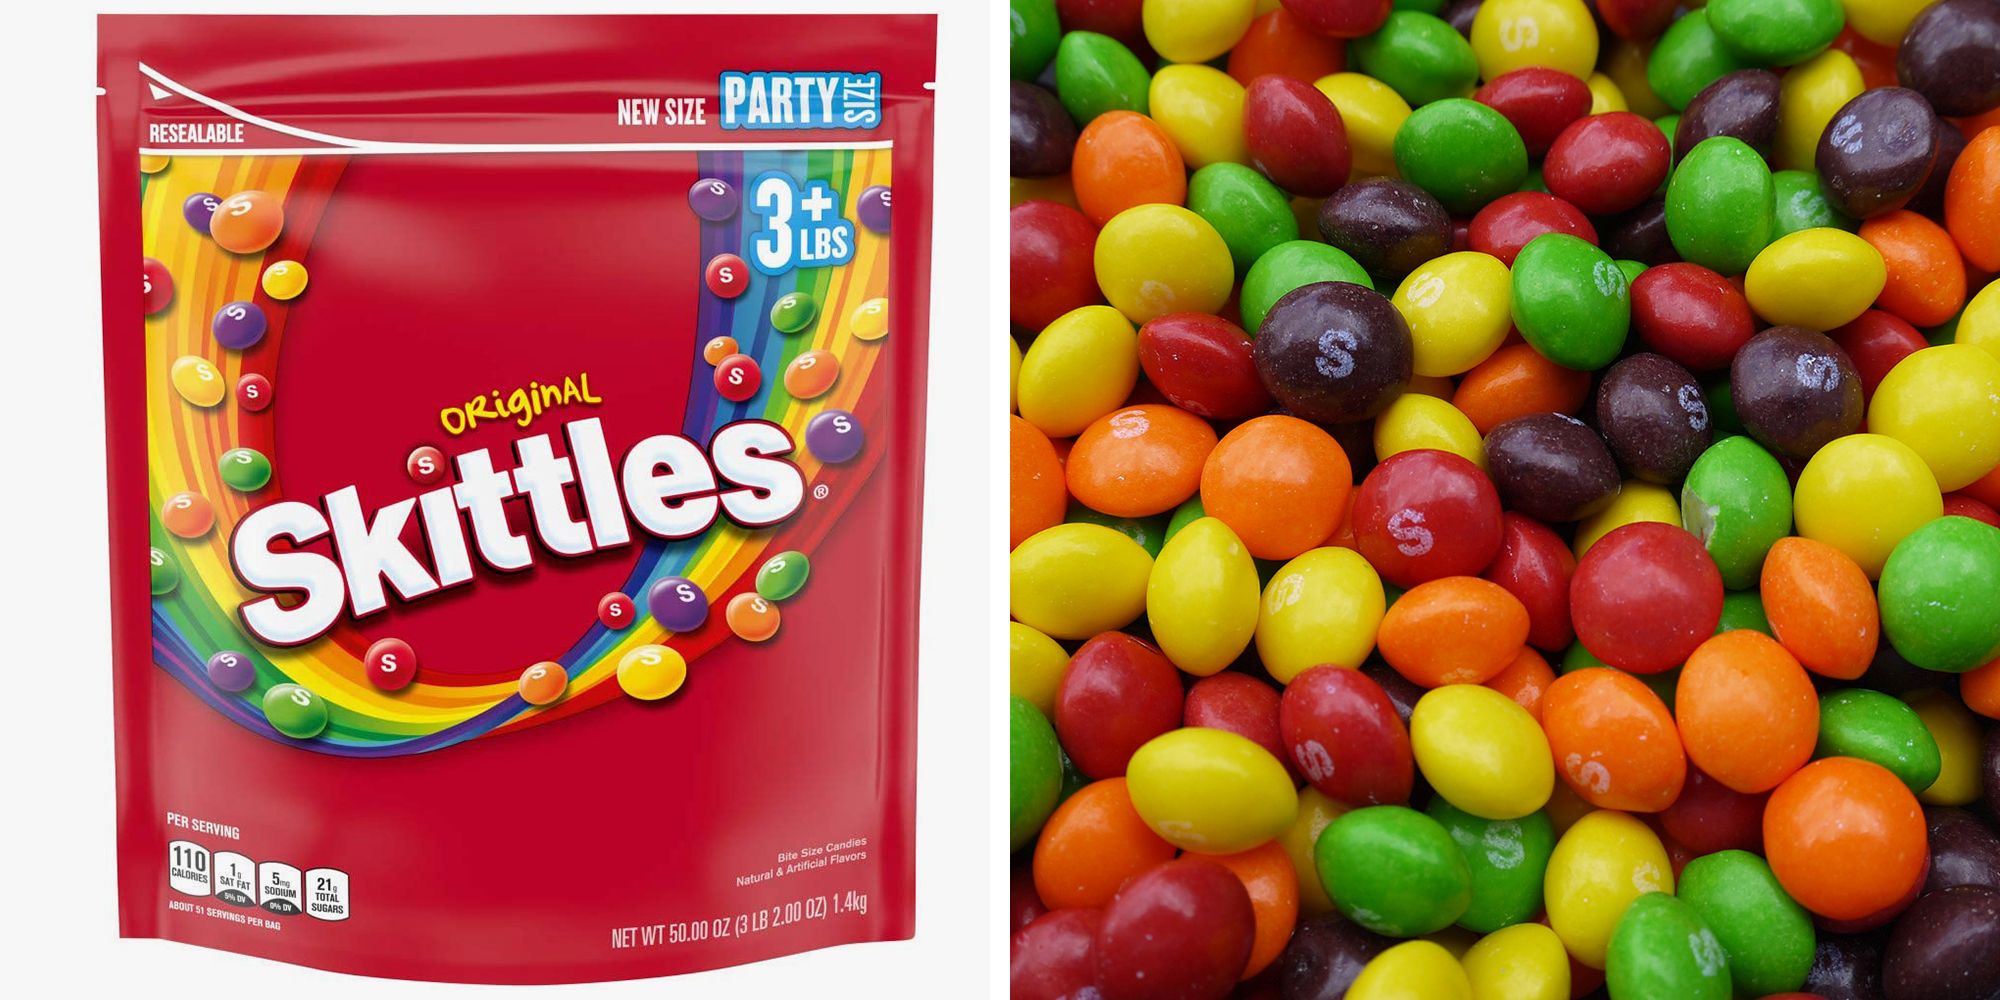 Skittles Party Pack, 1kg | Costco UK